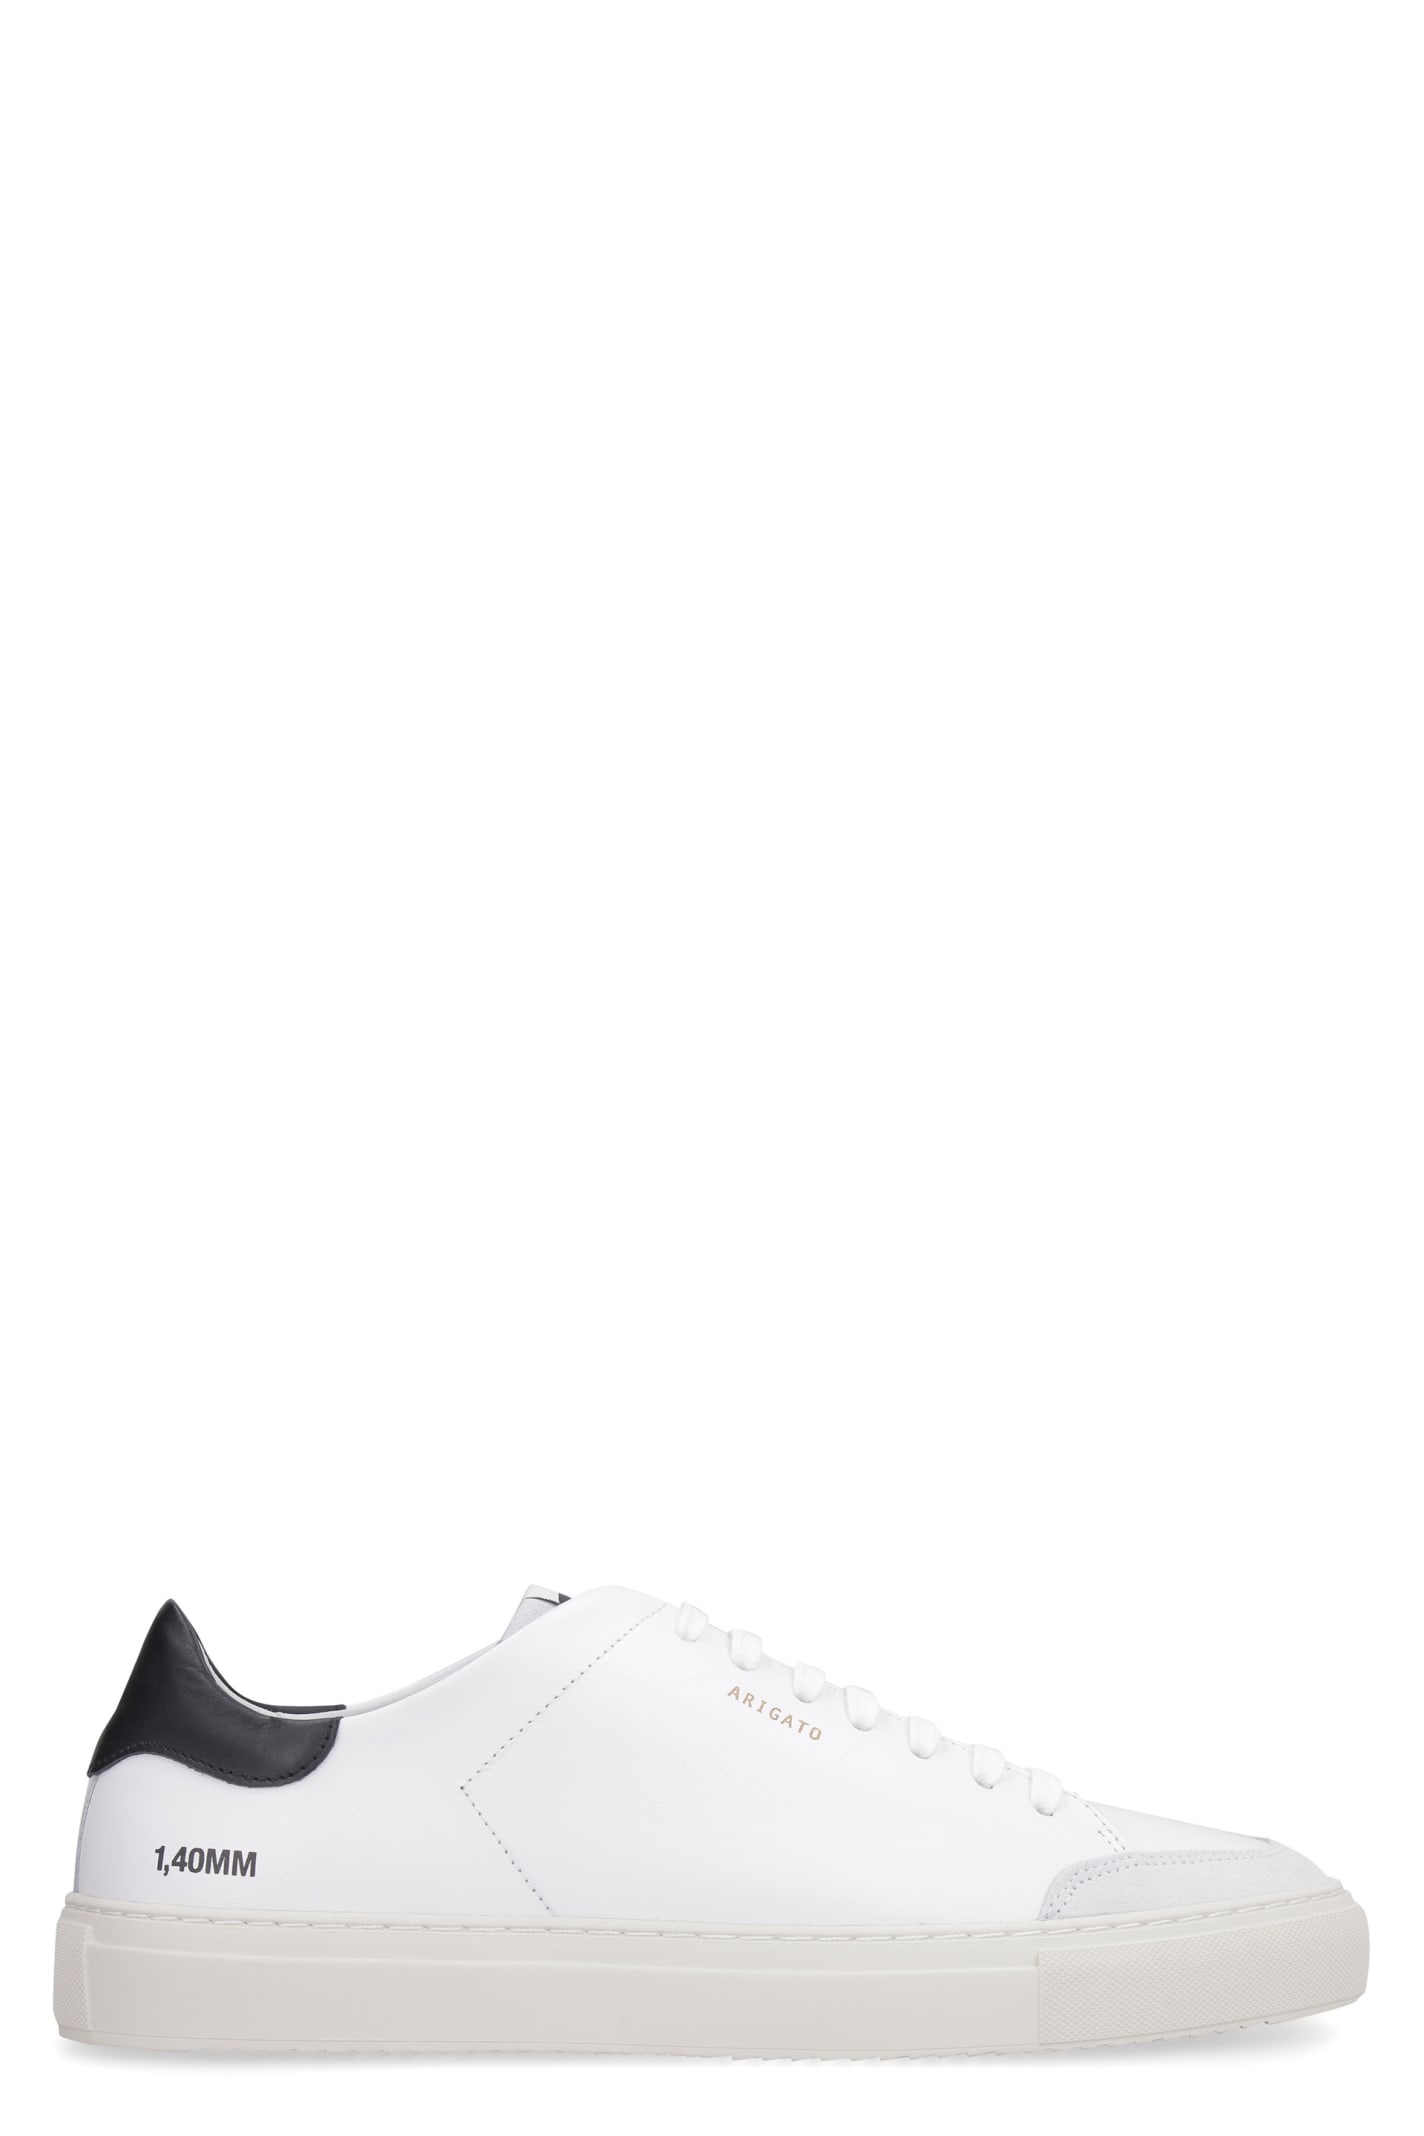 Axel Arigato Clean 90 Triple Leather Low-top Sneakers